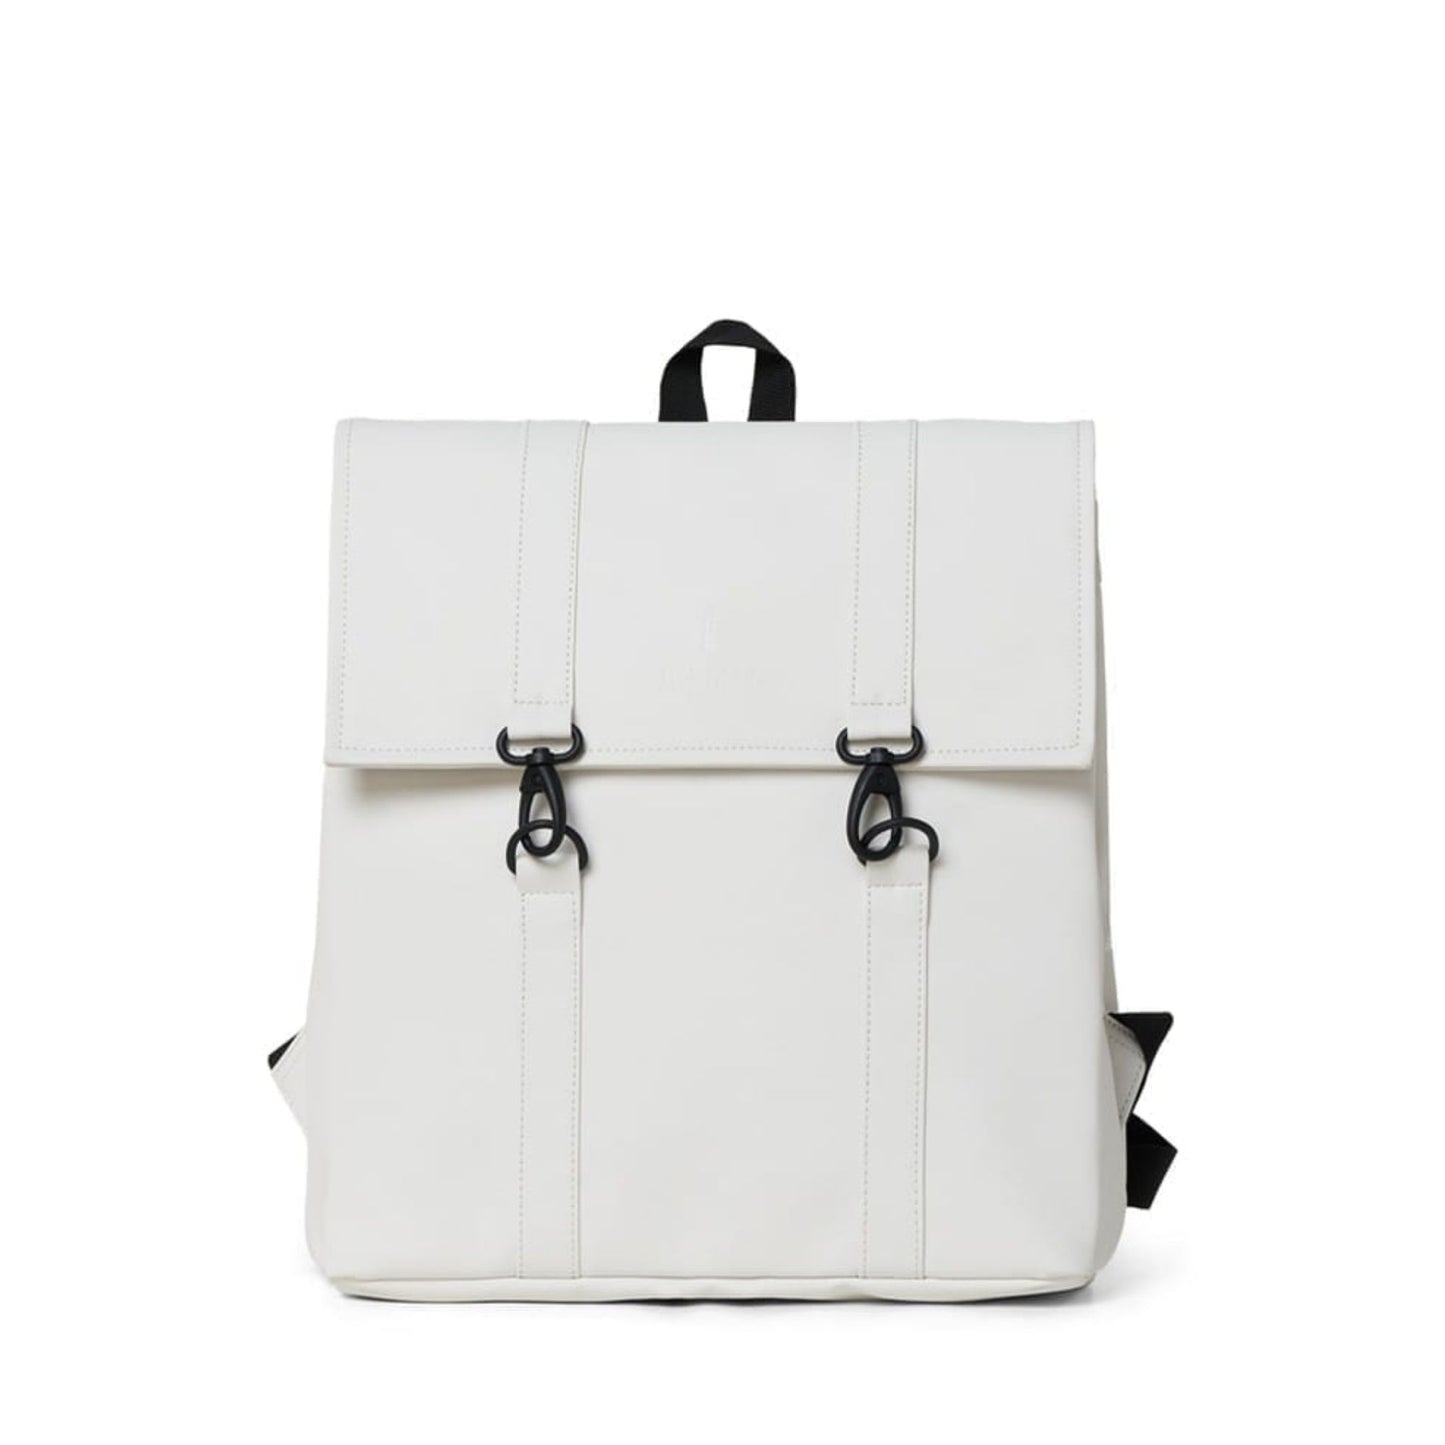 Rains waterproof backpack MSN bag off white for men and women front view